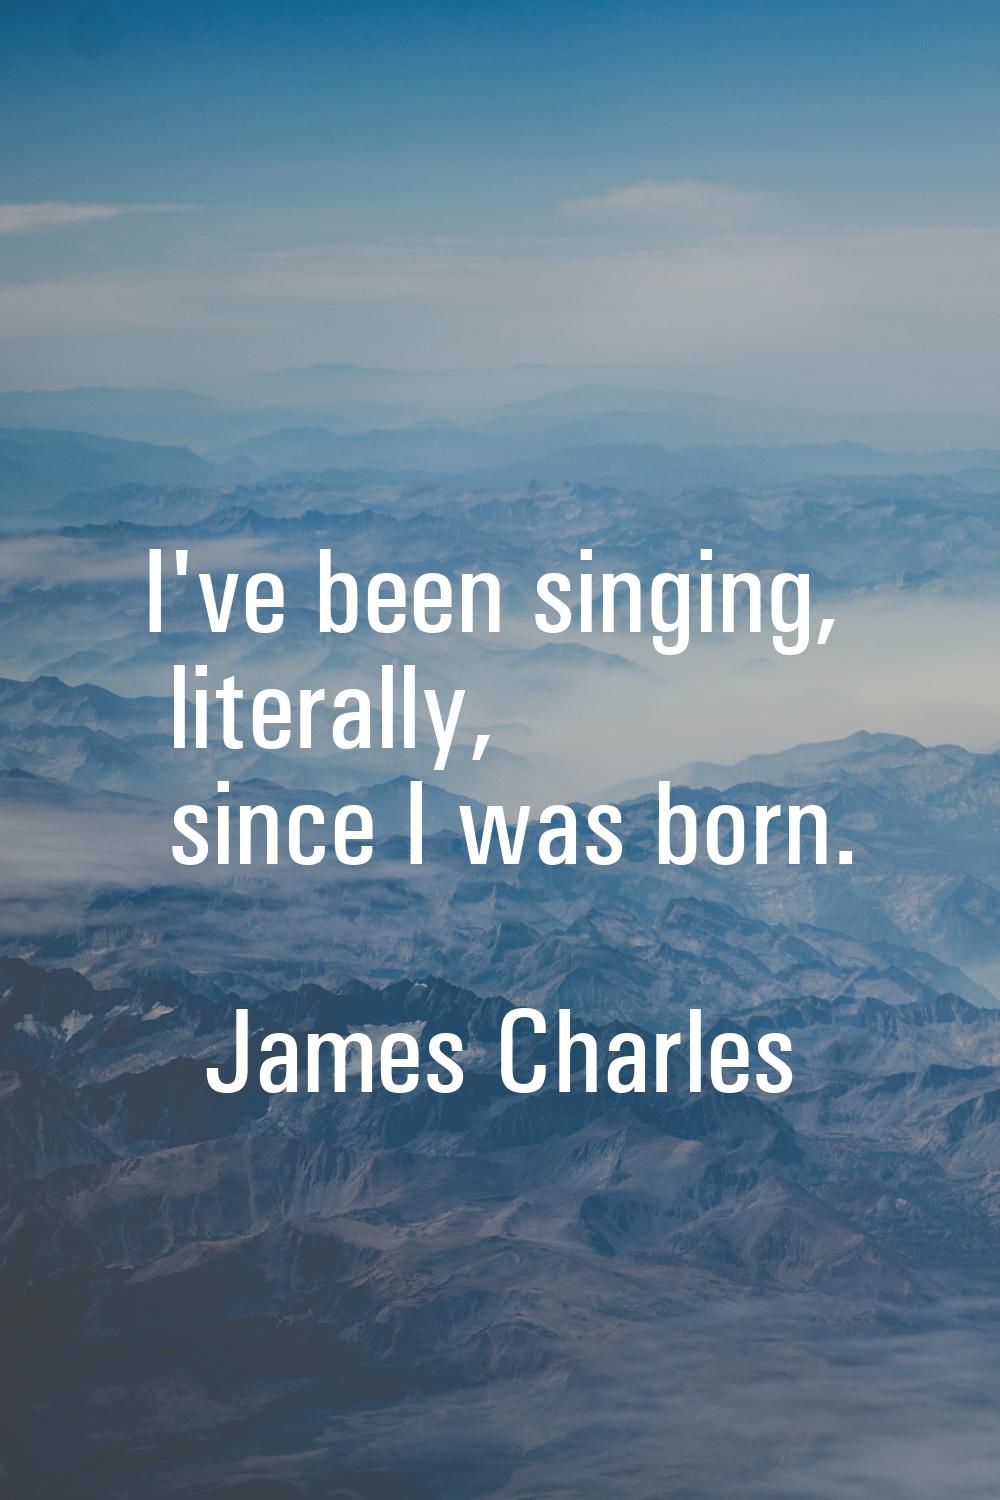 I've been singing, literally, since I was born.